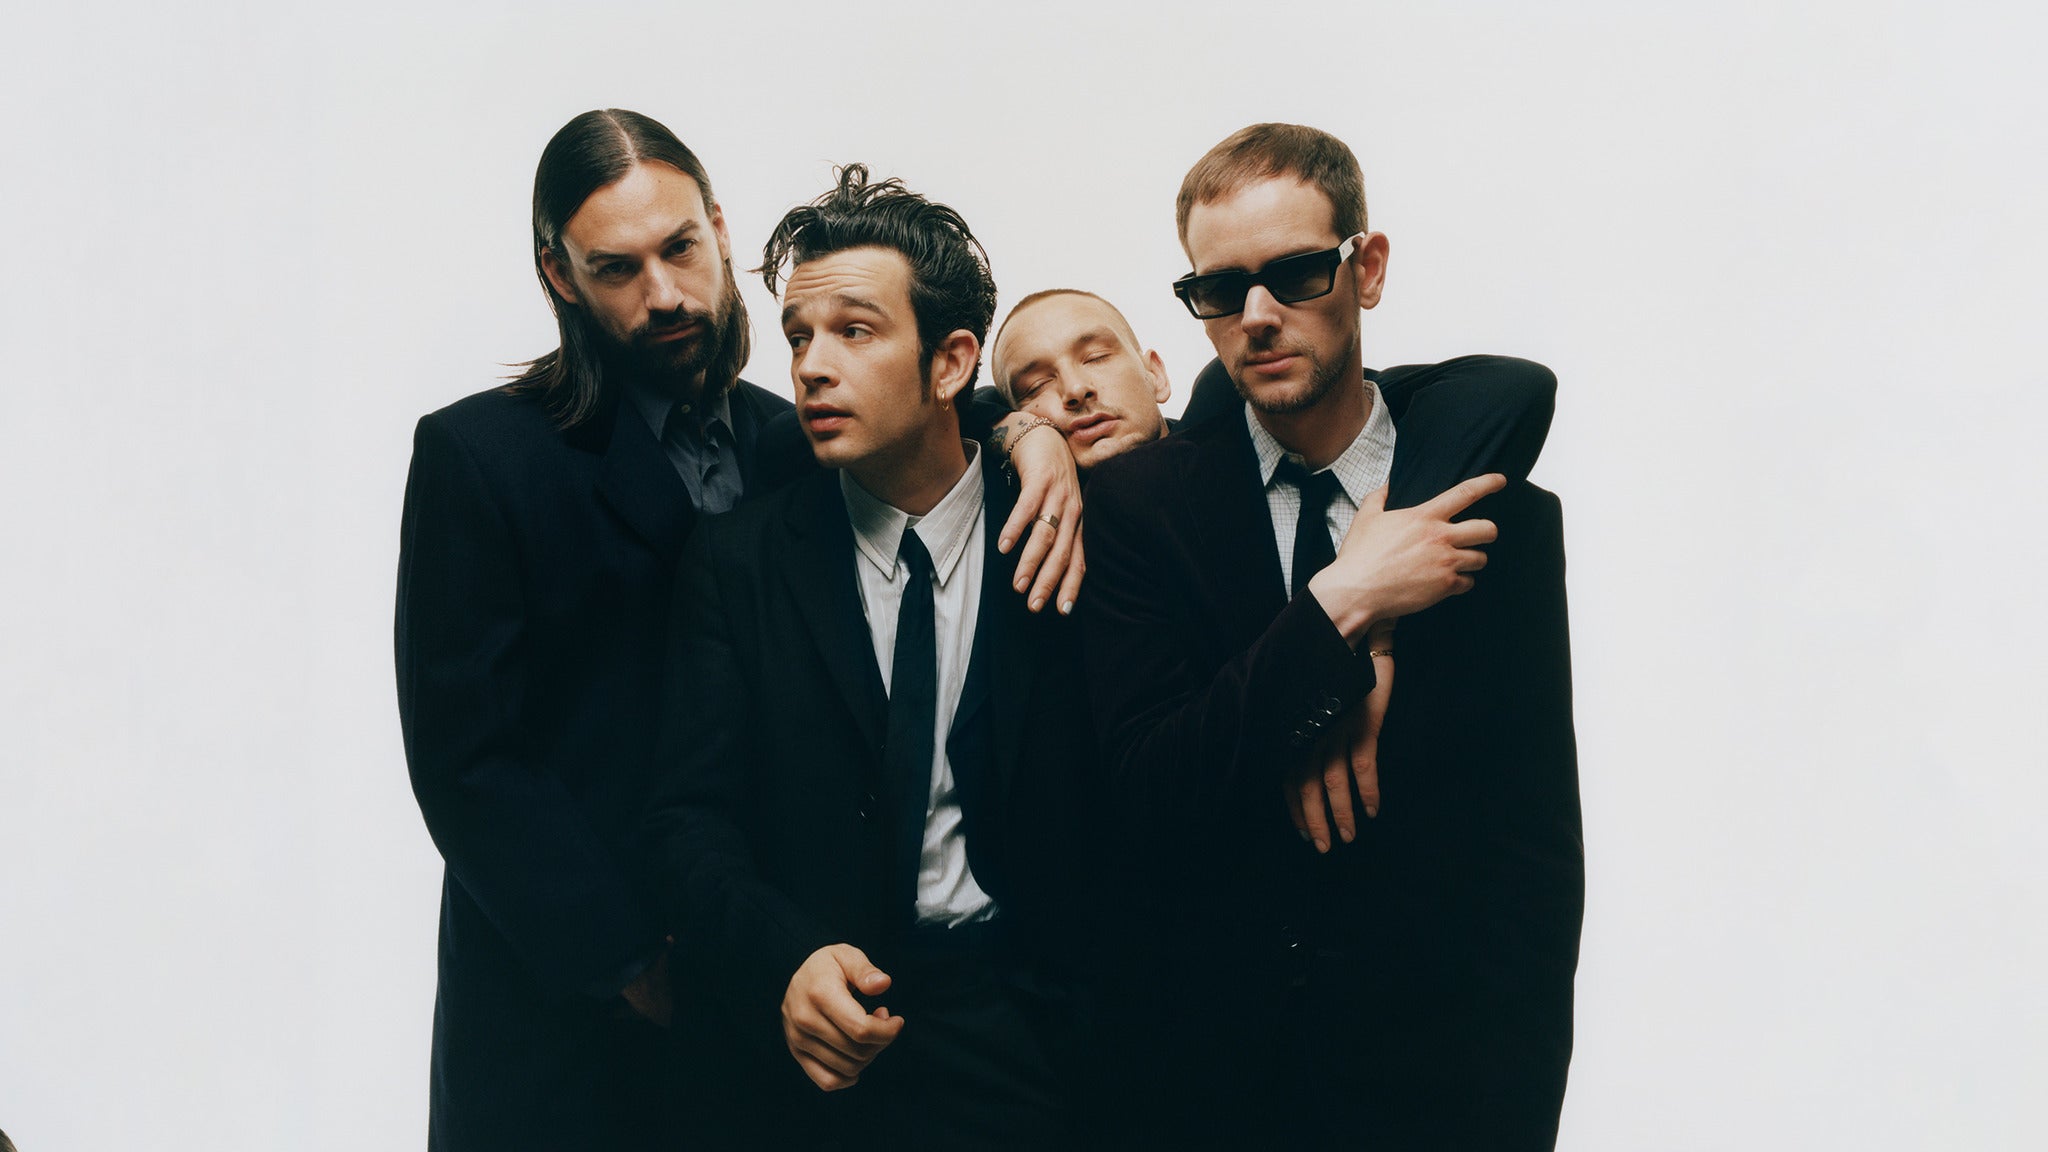 SORRY, THIS EVENT IS NO LONGER ACTIVE<br>The 1975 at Mission Ballroom - Denver, CO 80216